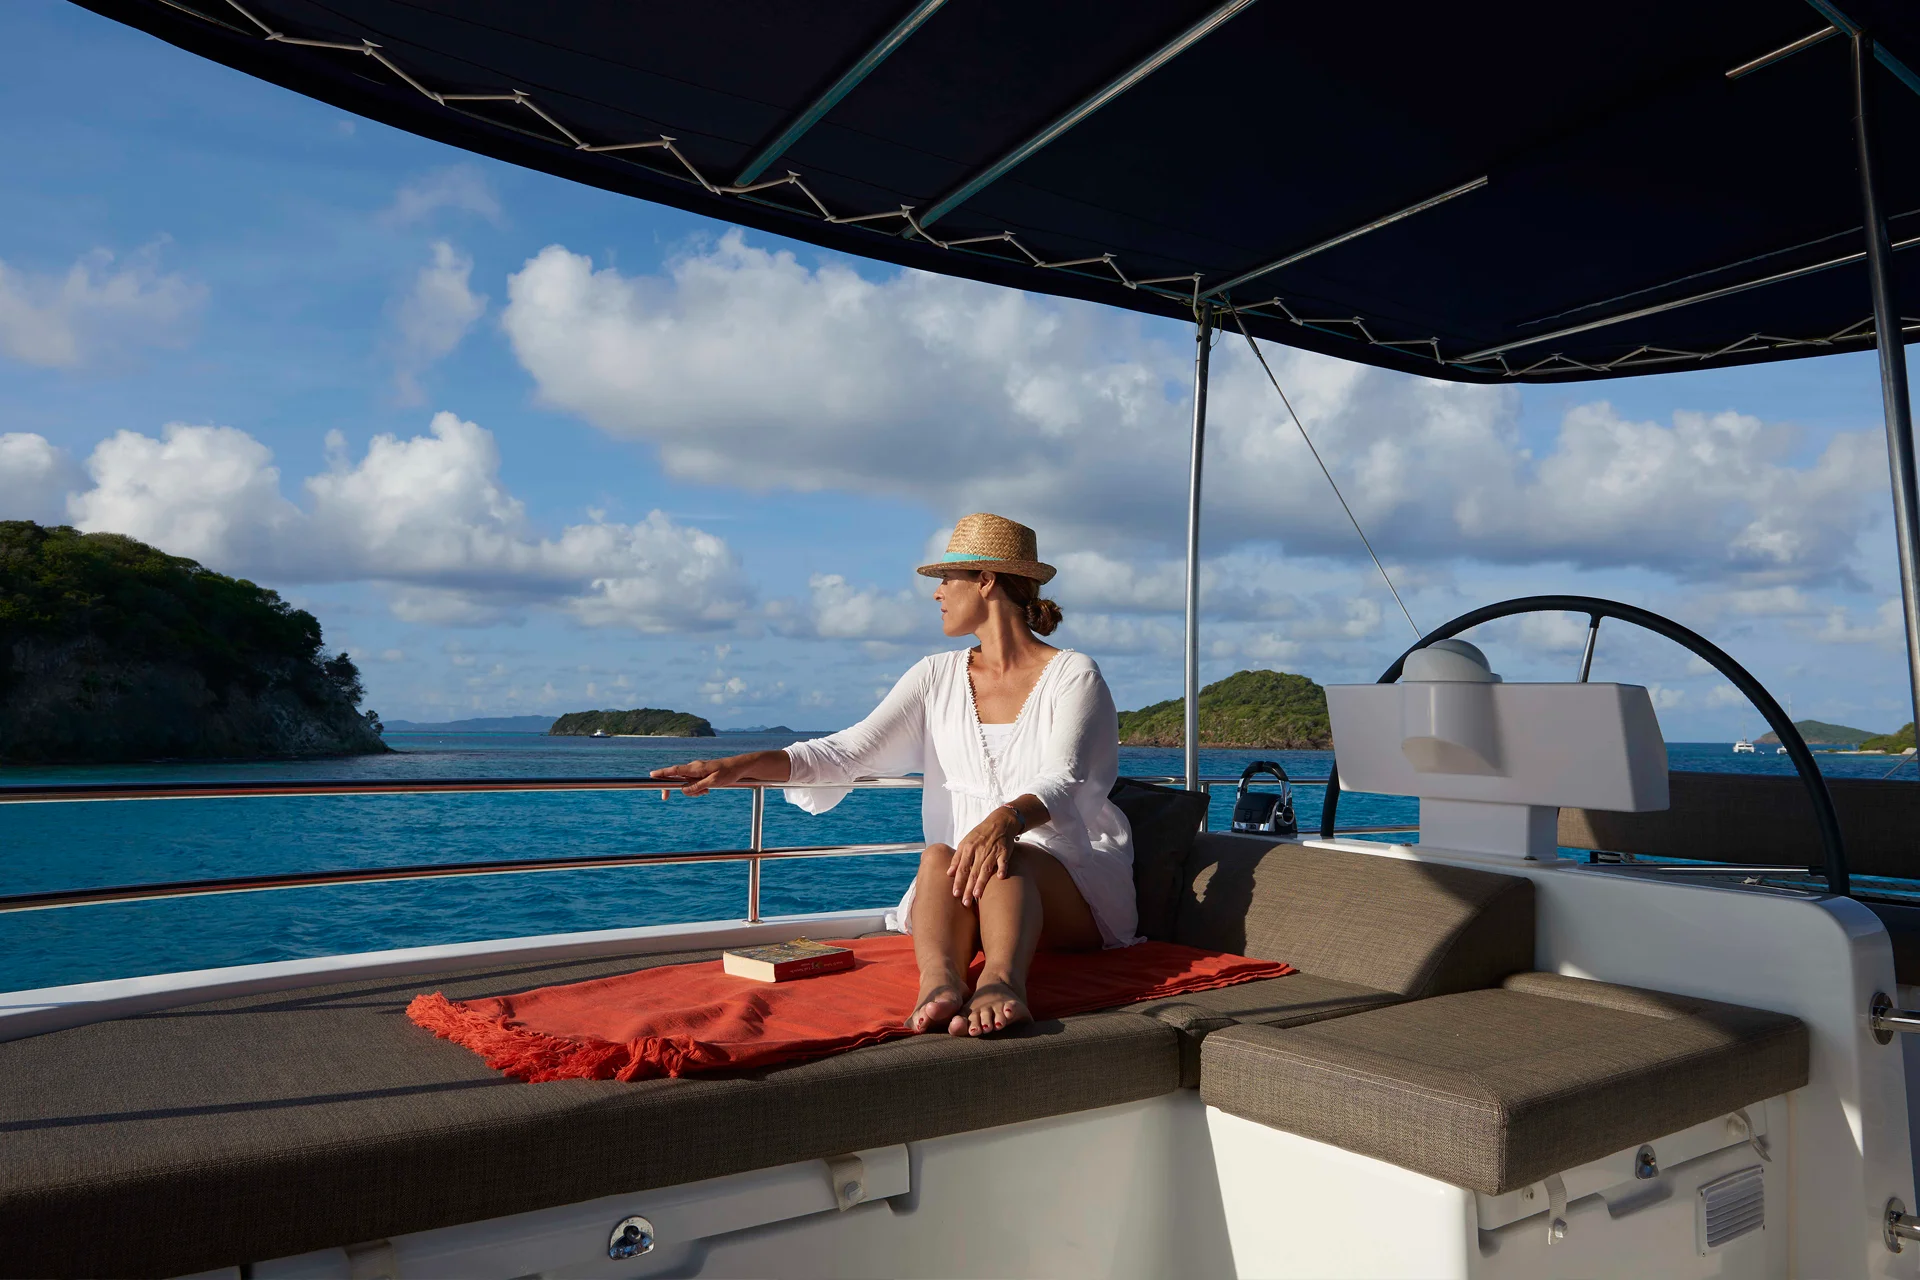 Guest enjoying sailing in a crewed yacht charter near some islands